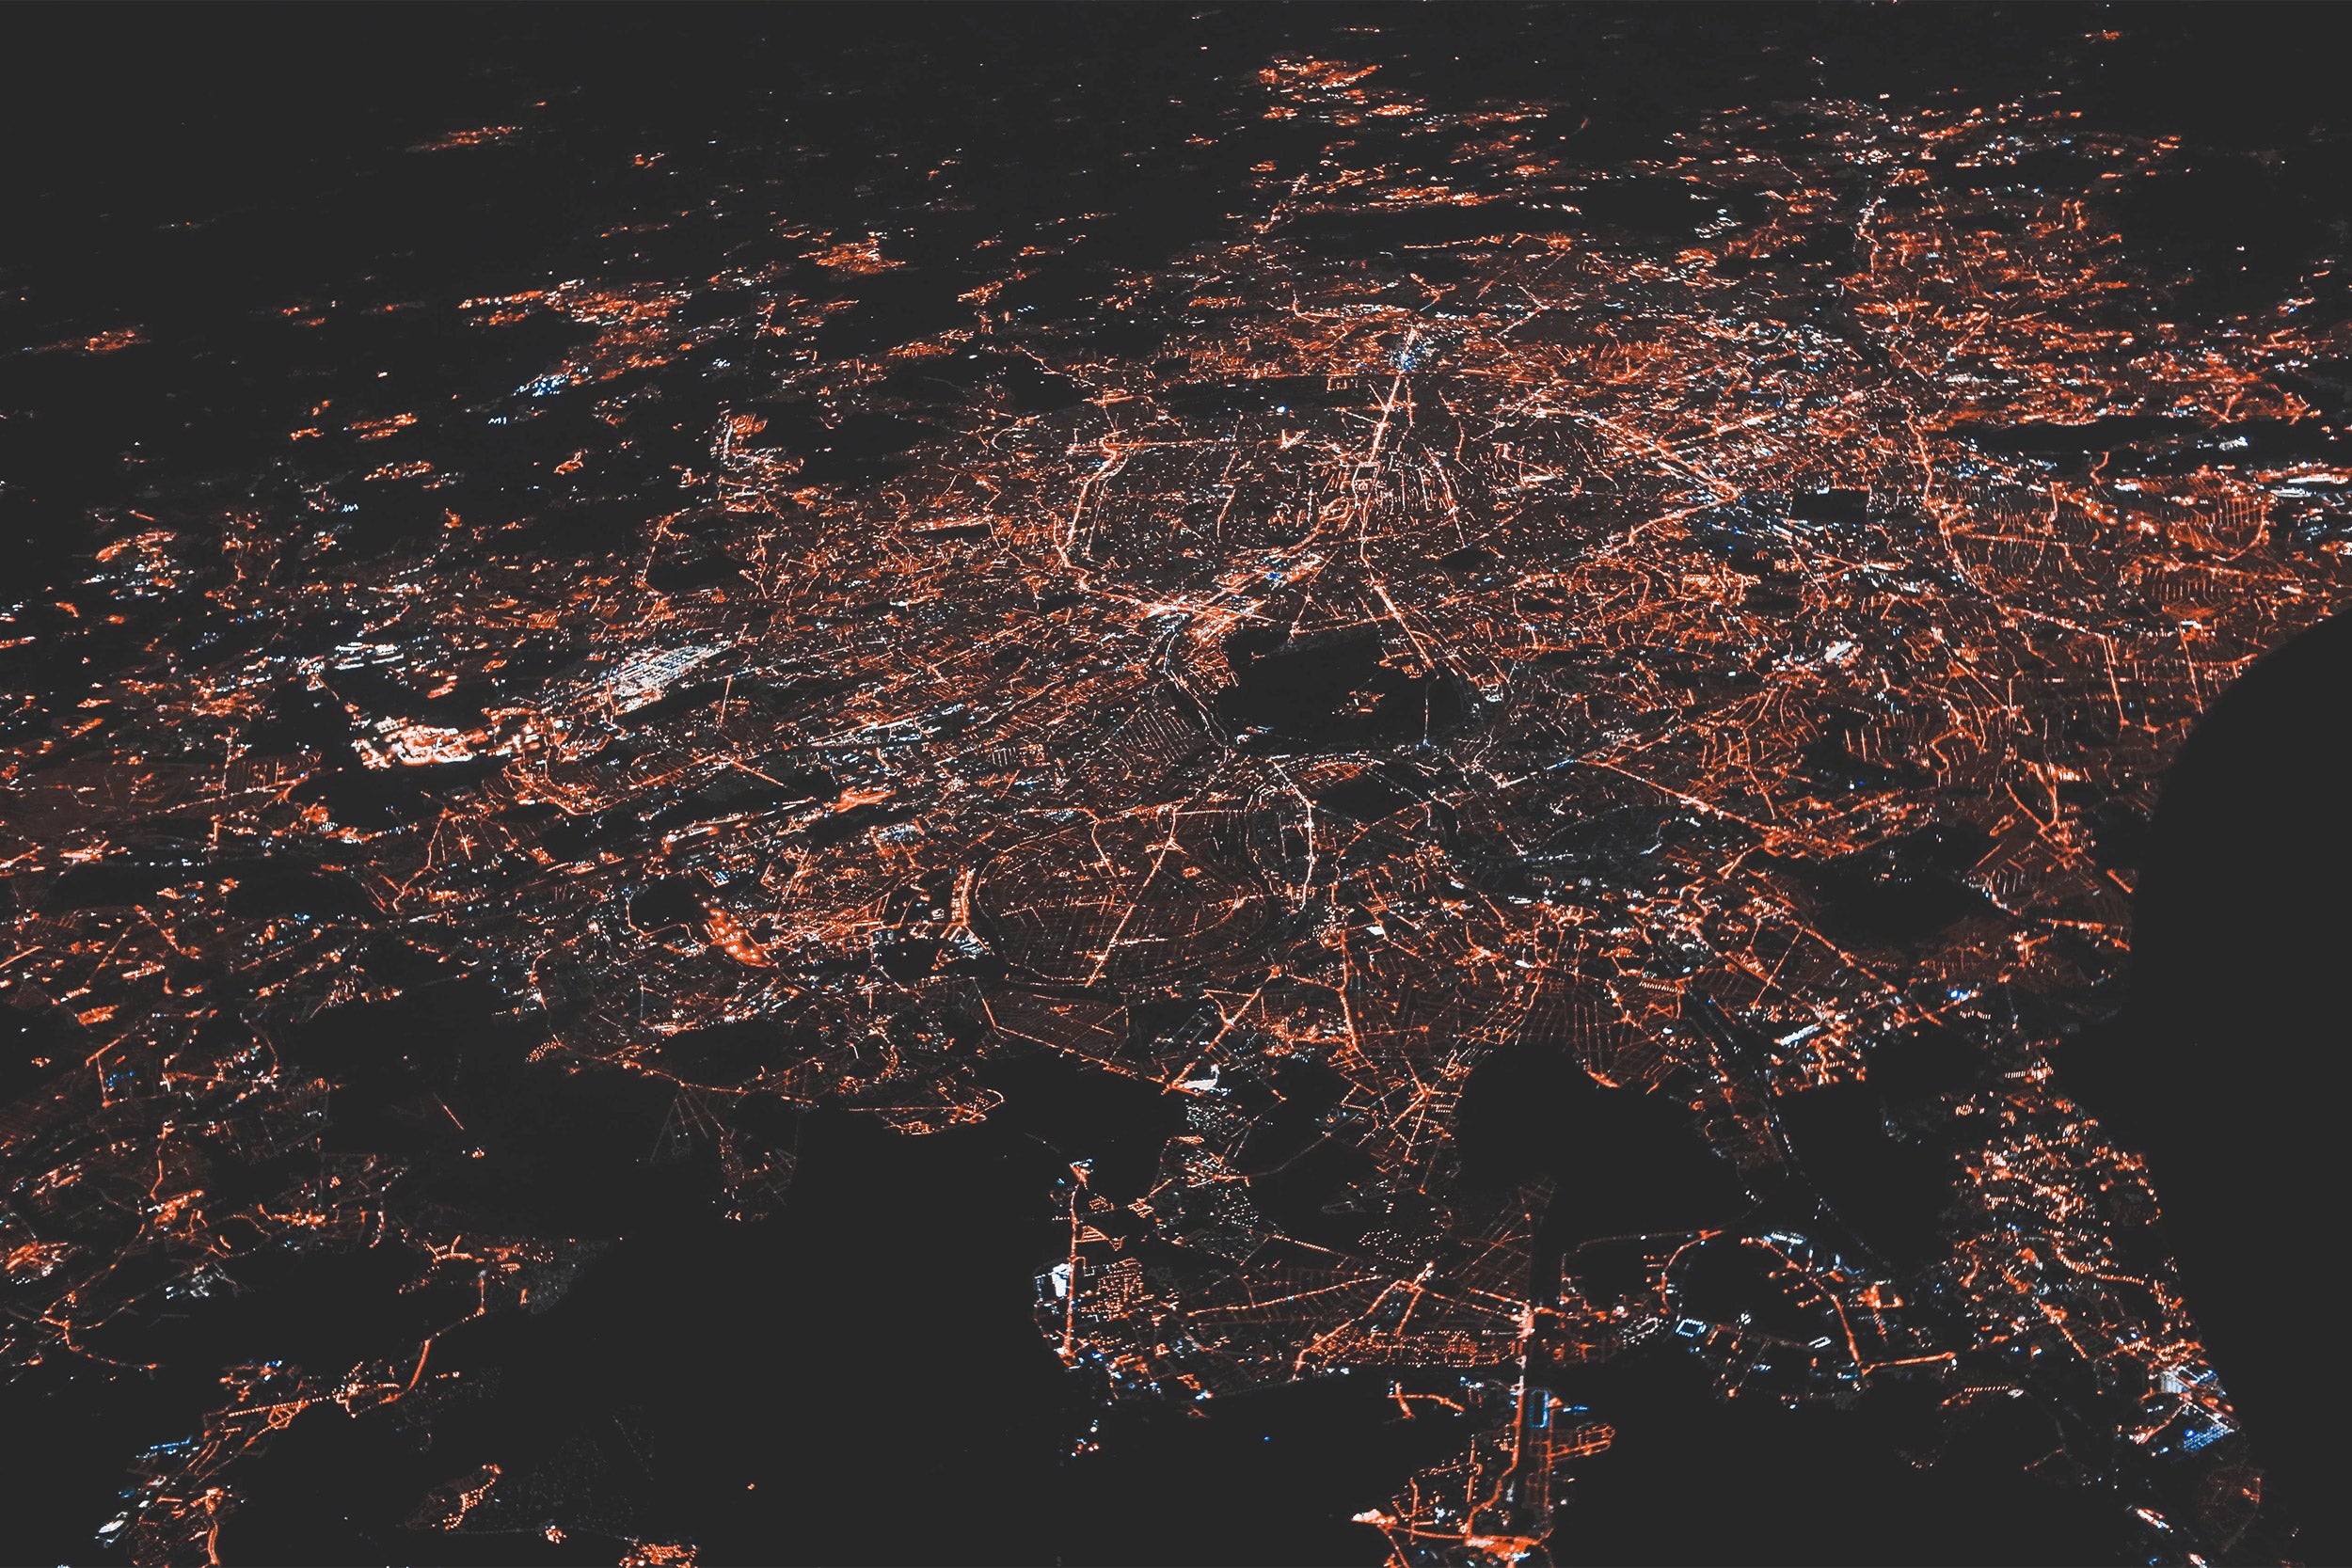 View from above of city network of lights.